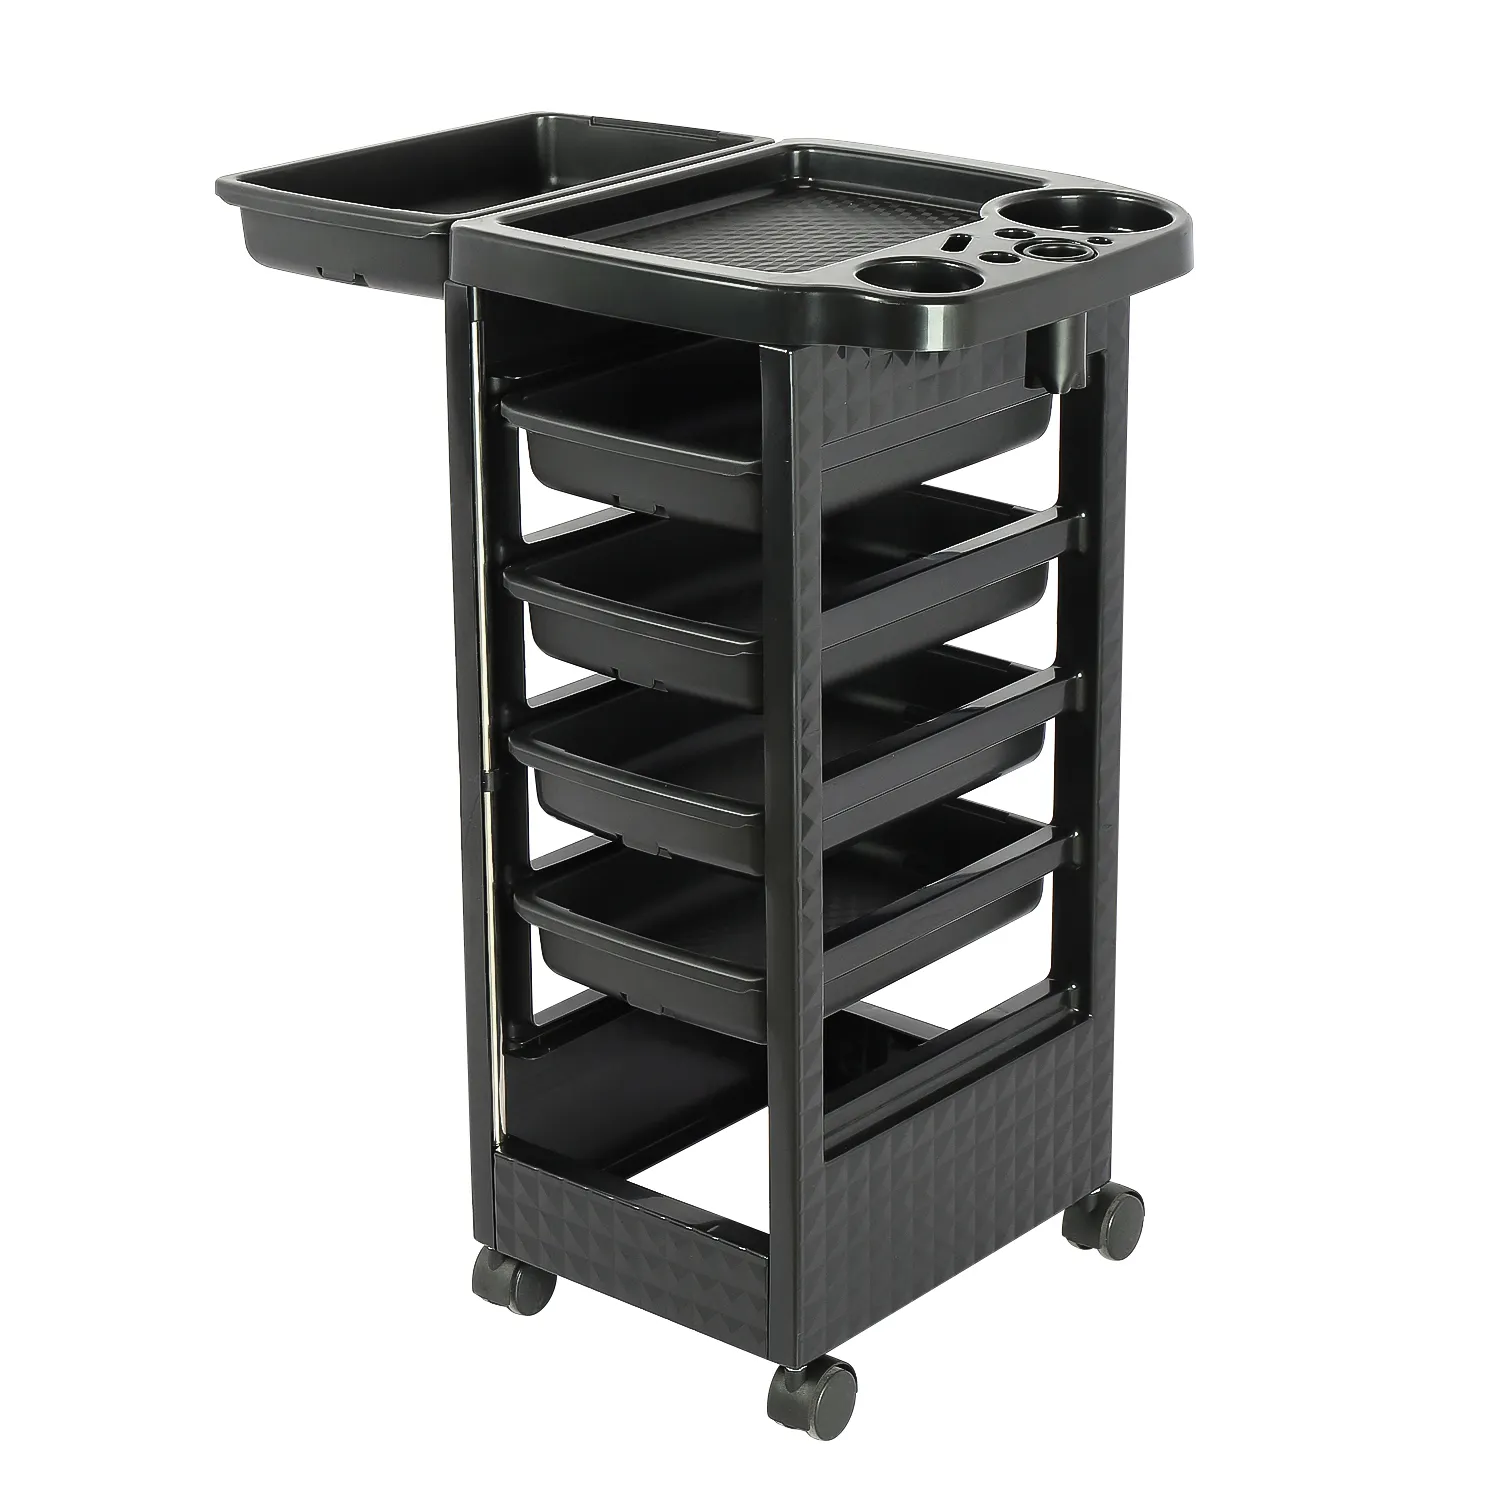 Personal Assistant Trolley Hairdressing Beauty Salon Rolling Auxiliary Cart with 2 inch wheels